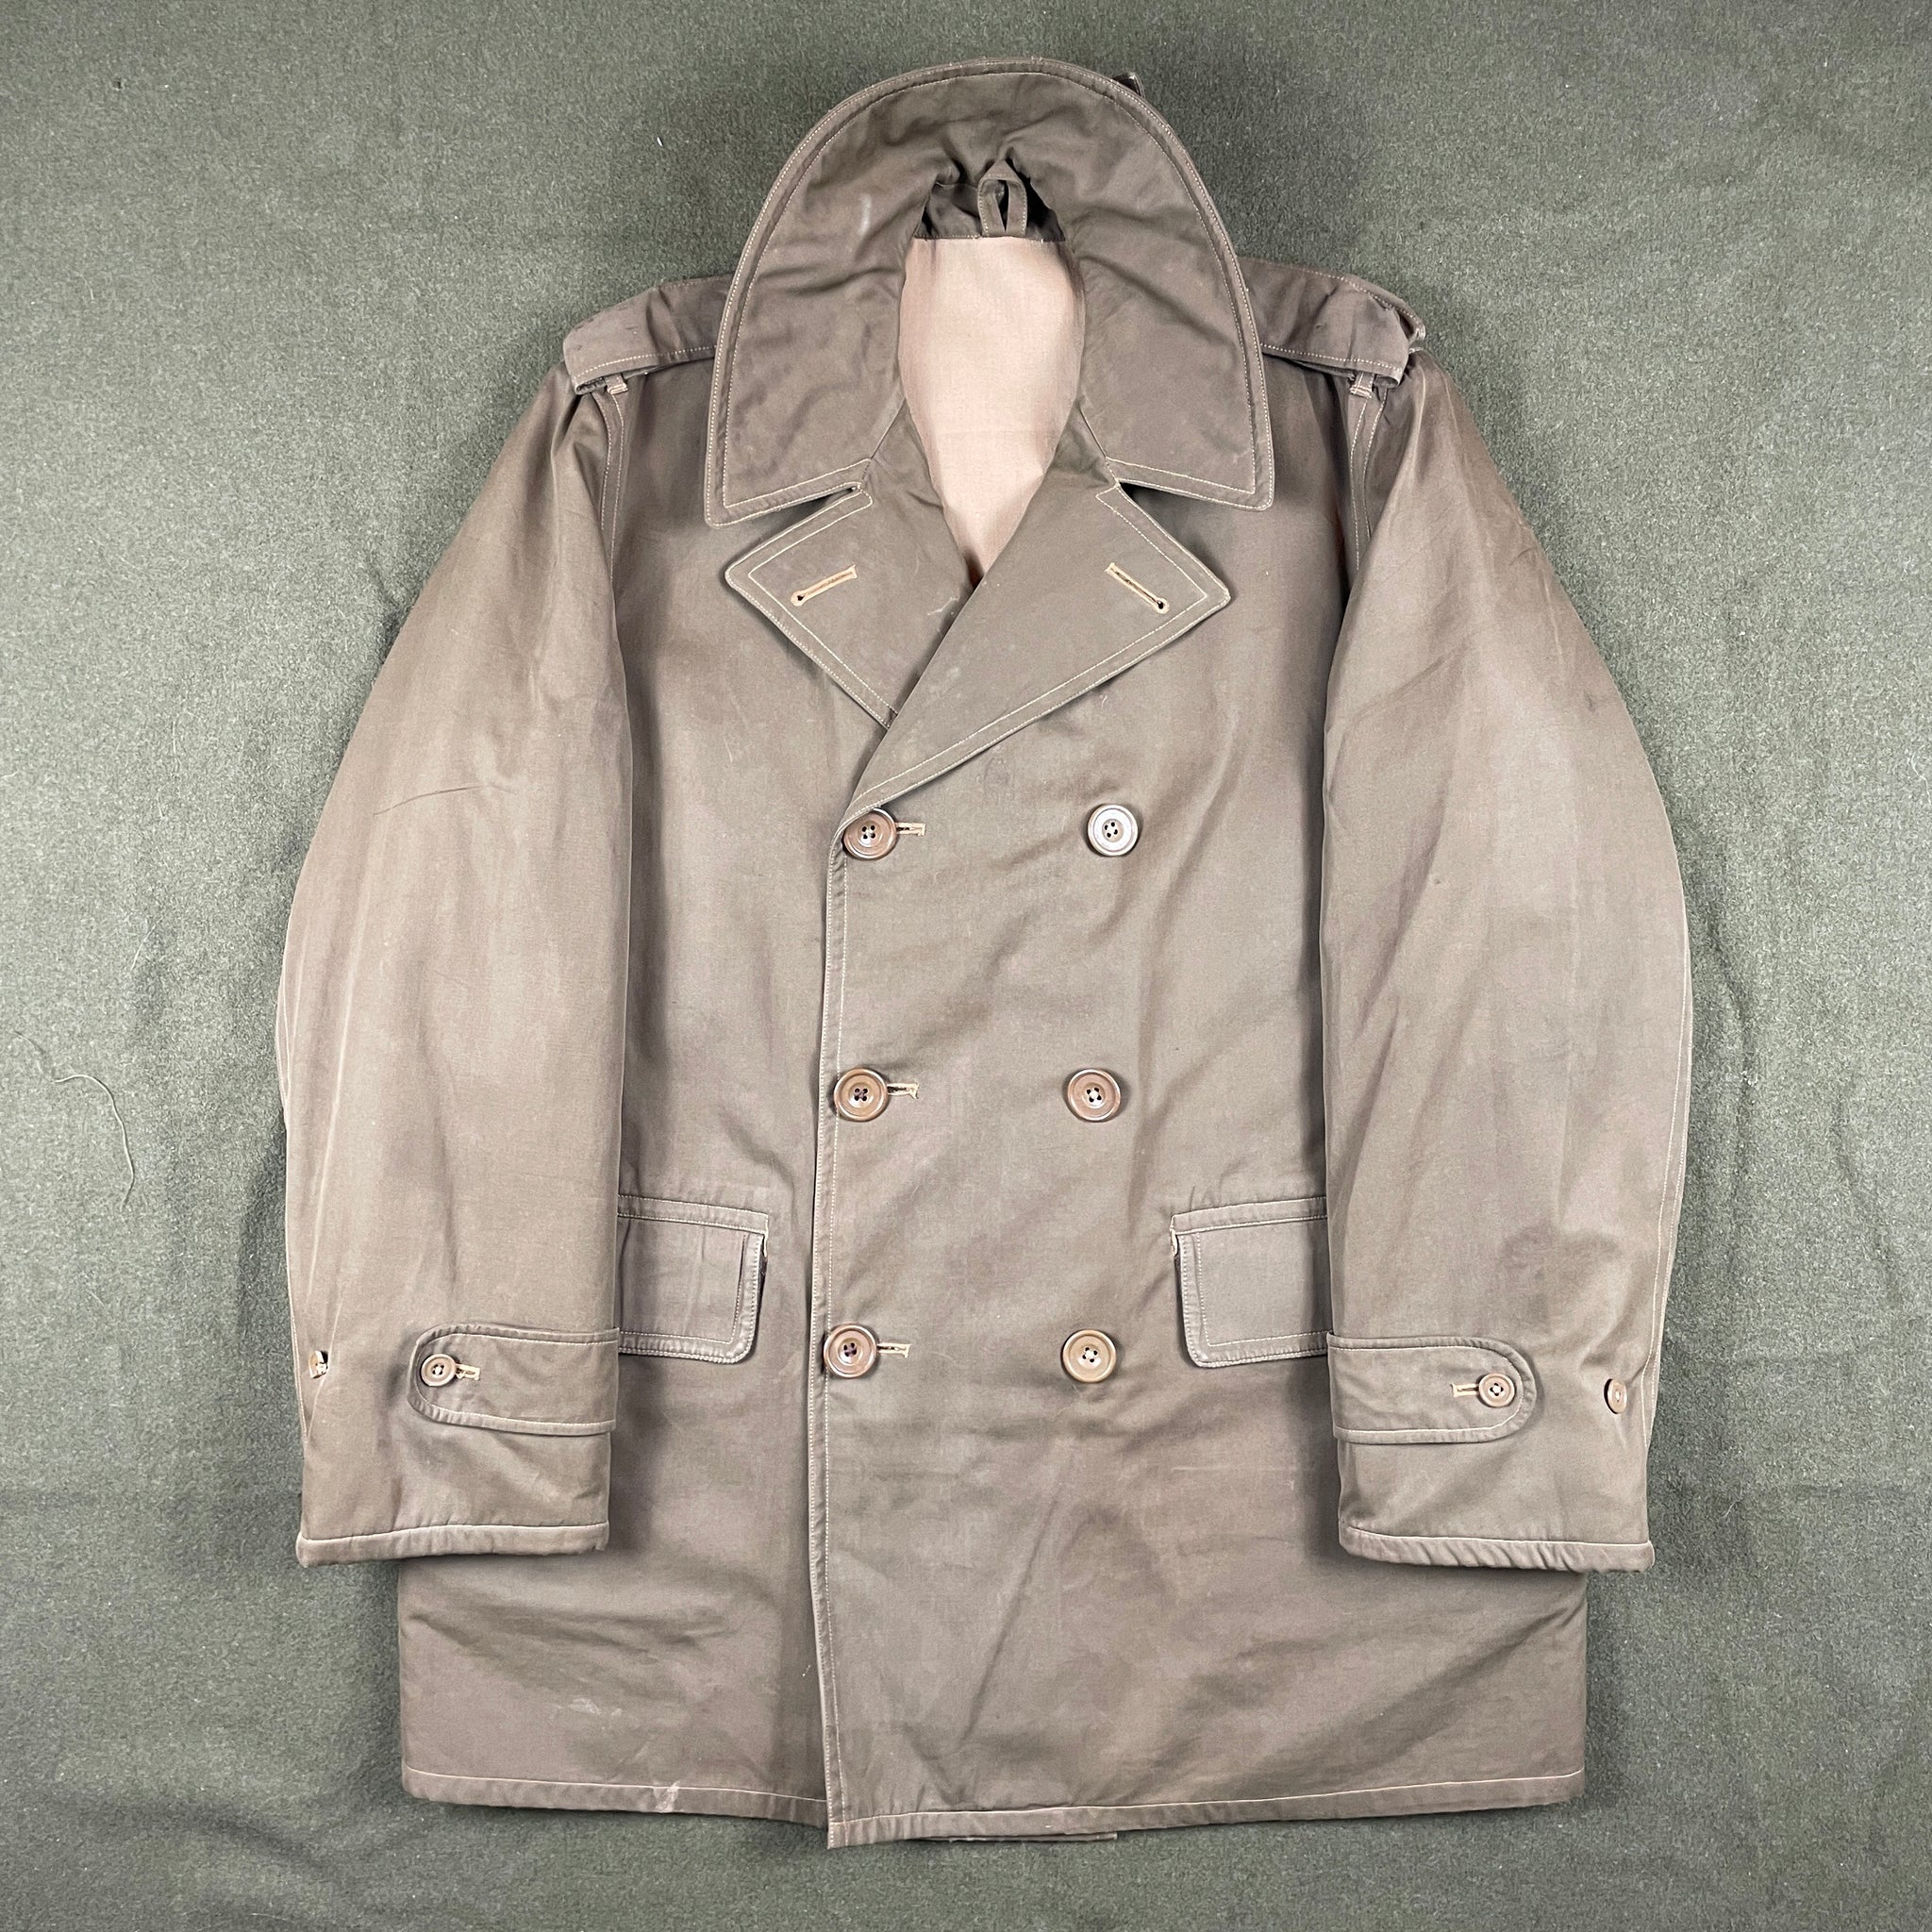 Royal Navy Reefer Jacket - Mint Condition – The Major's Tailor